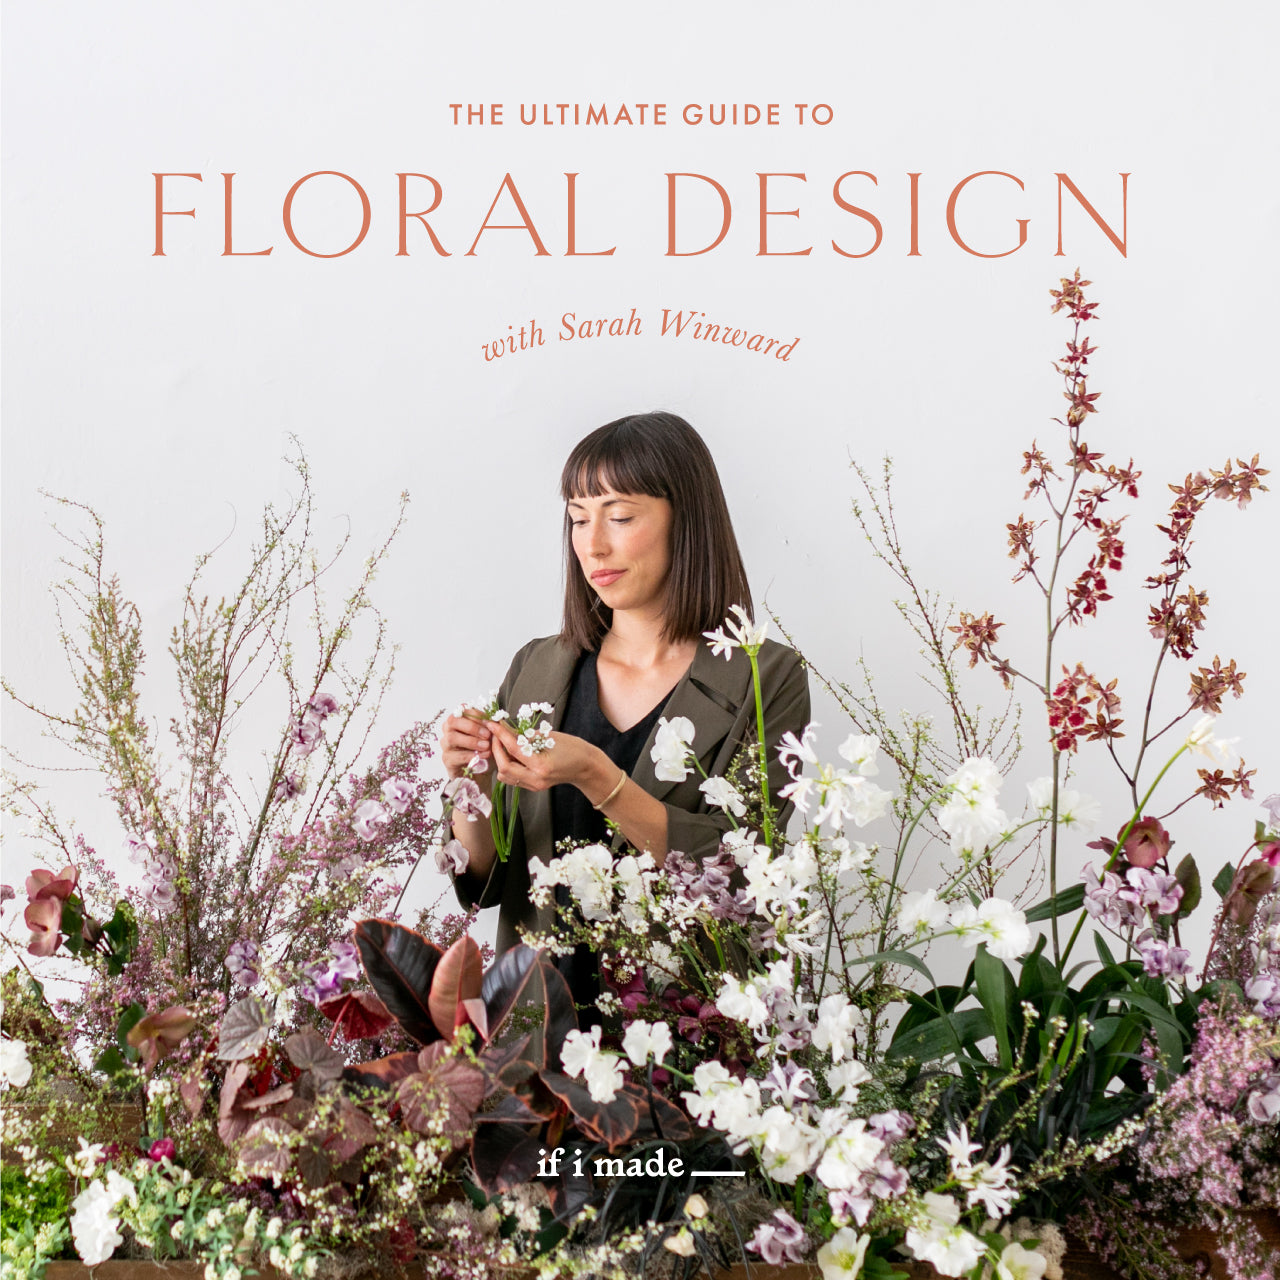 The Ultimate Guide to Floral Design with Sarah Winward (ESPP) - 23 payments of $69